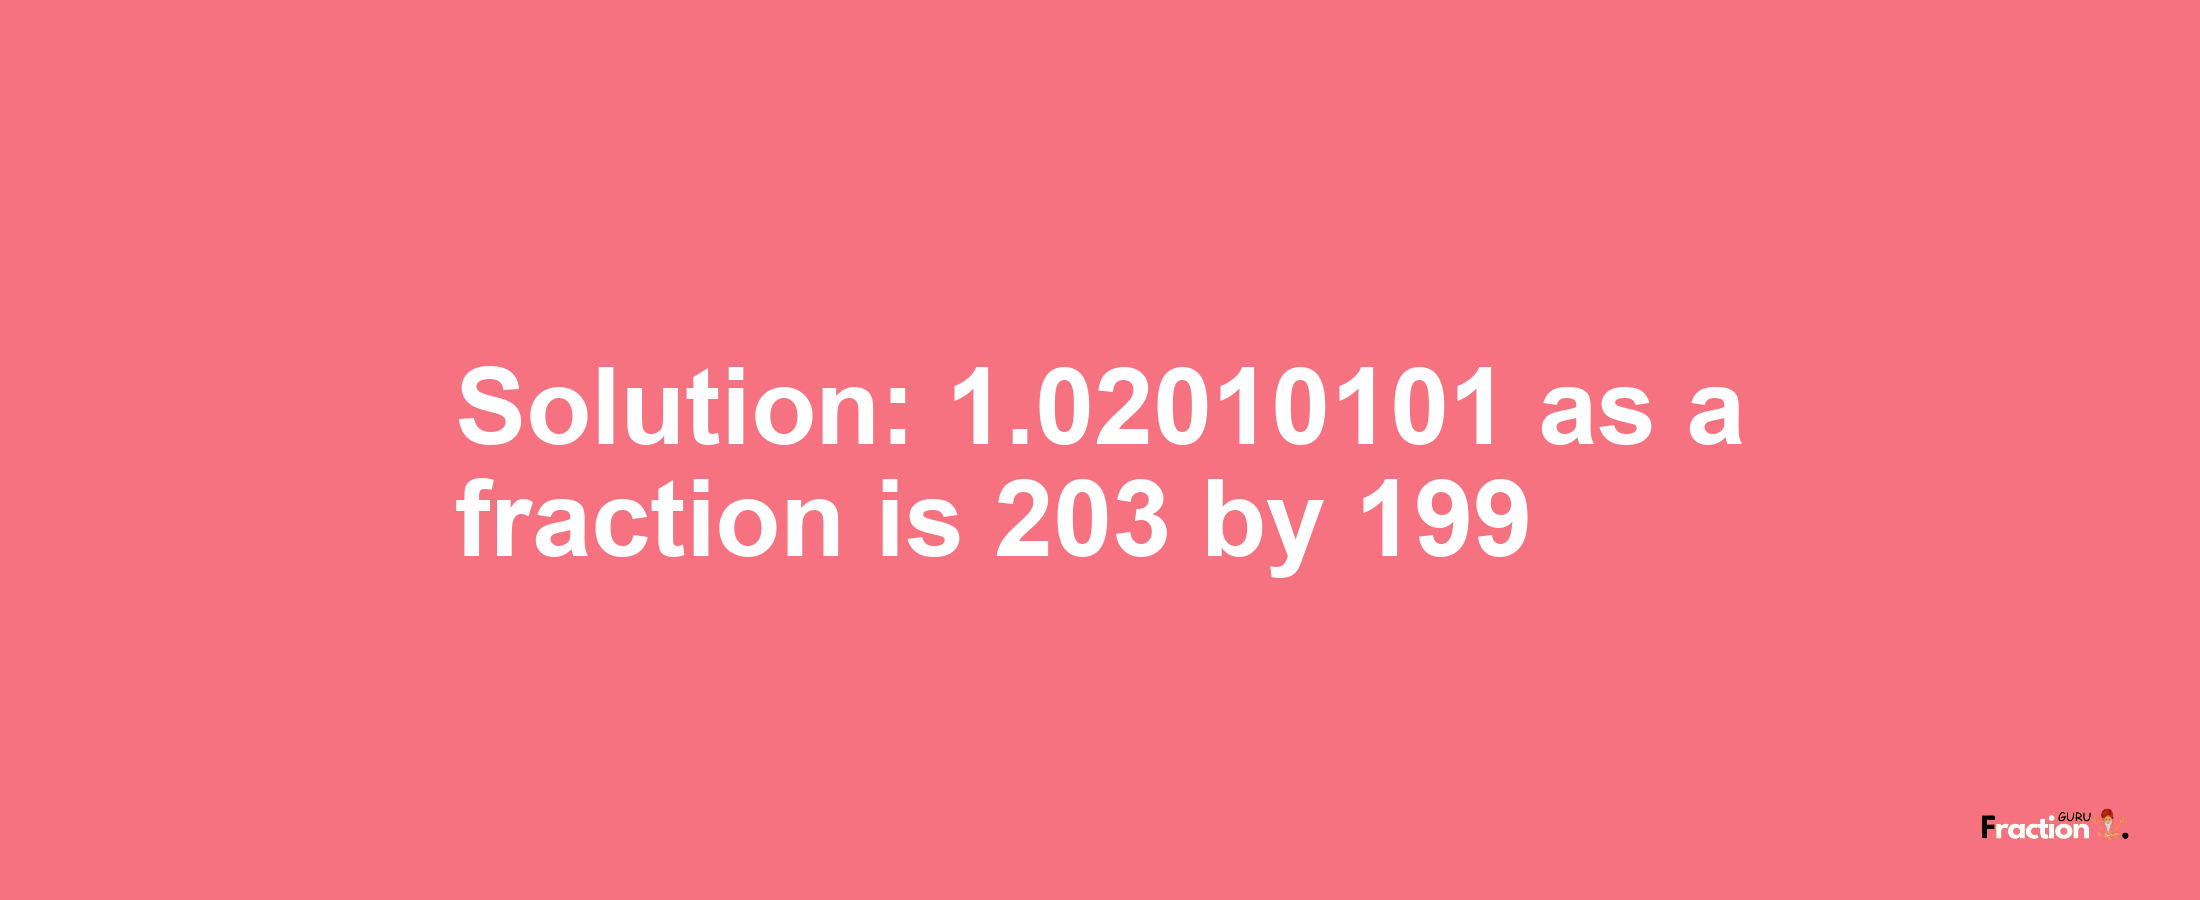 Solution:1.02010101 as a fraction is 203/199